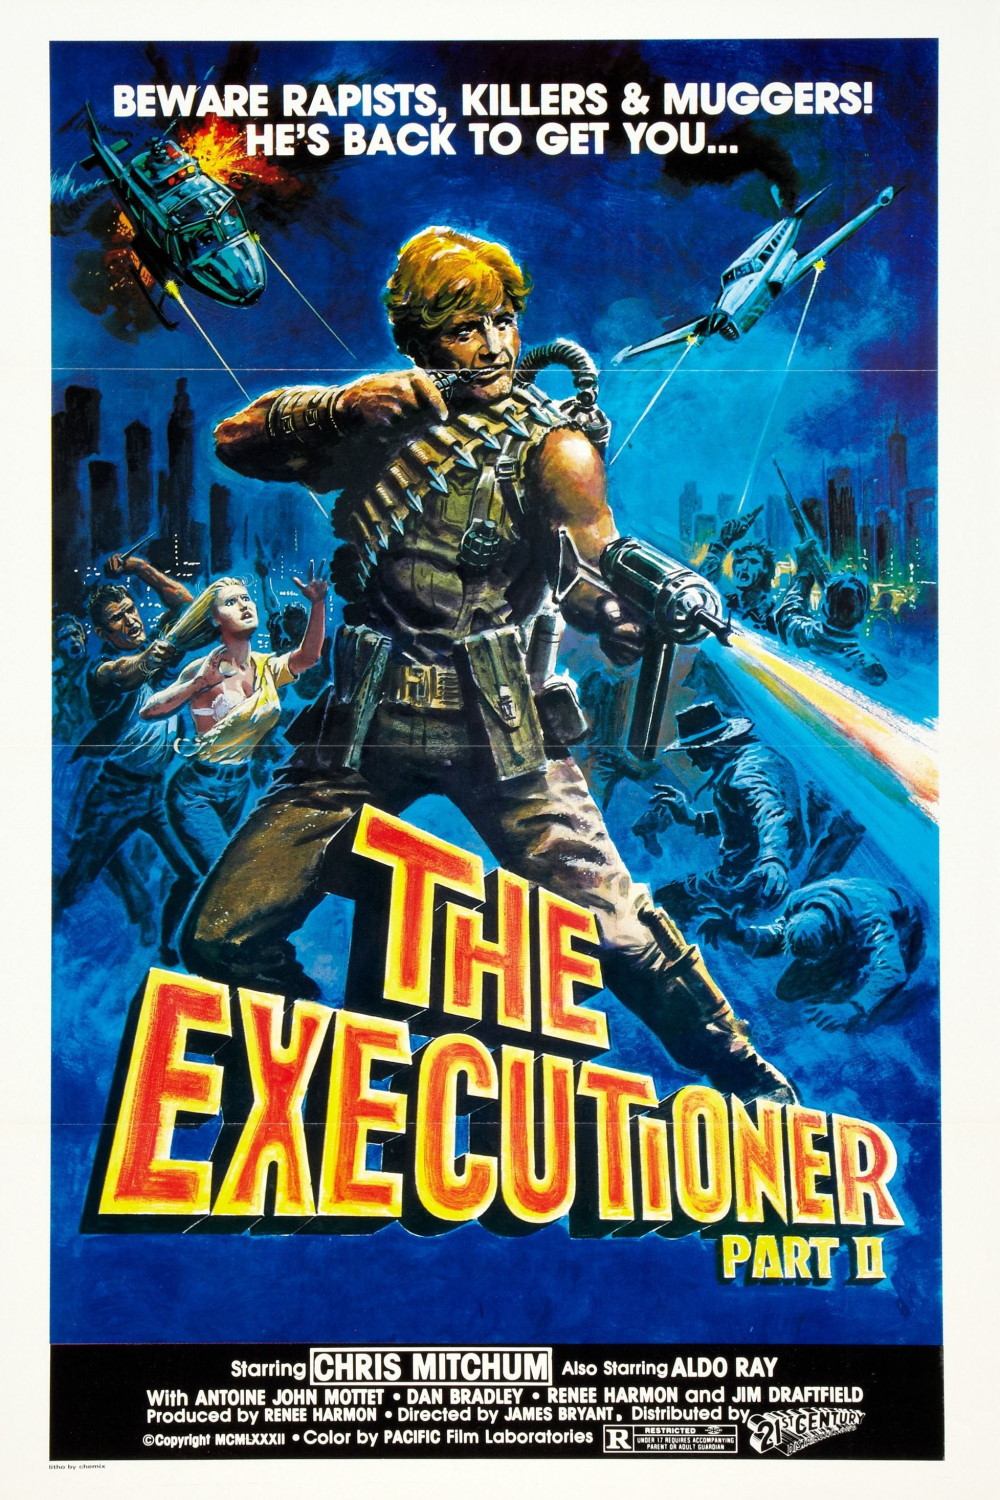 The Executioner, Part II (1984) Poster